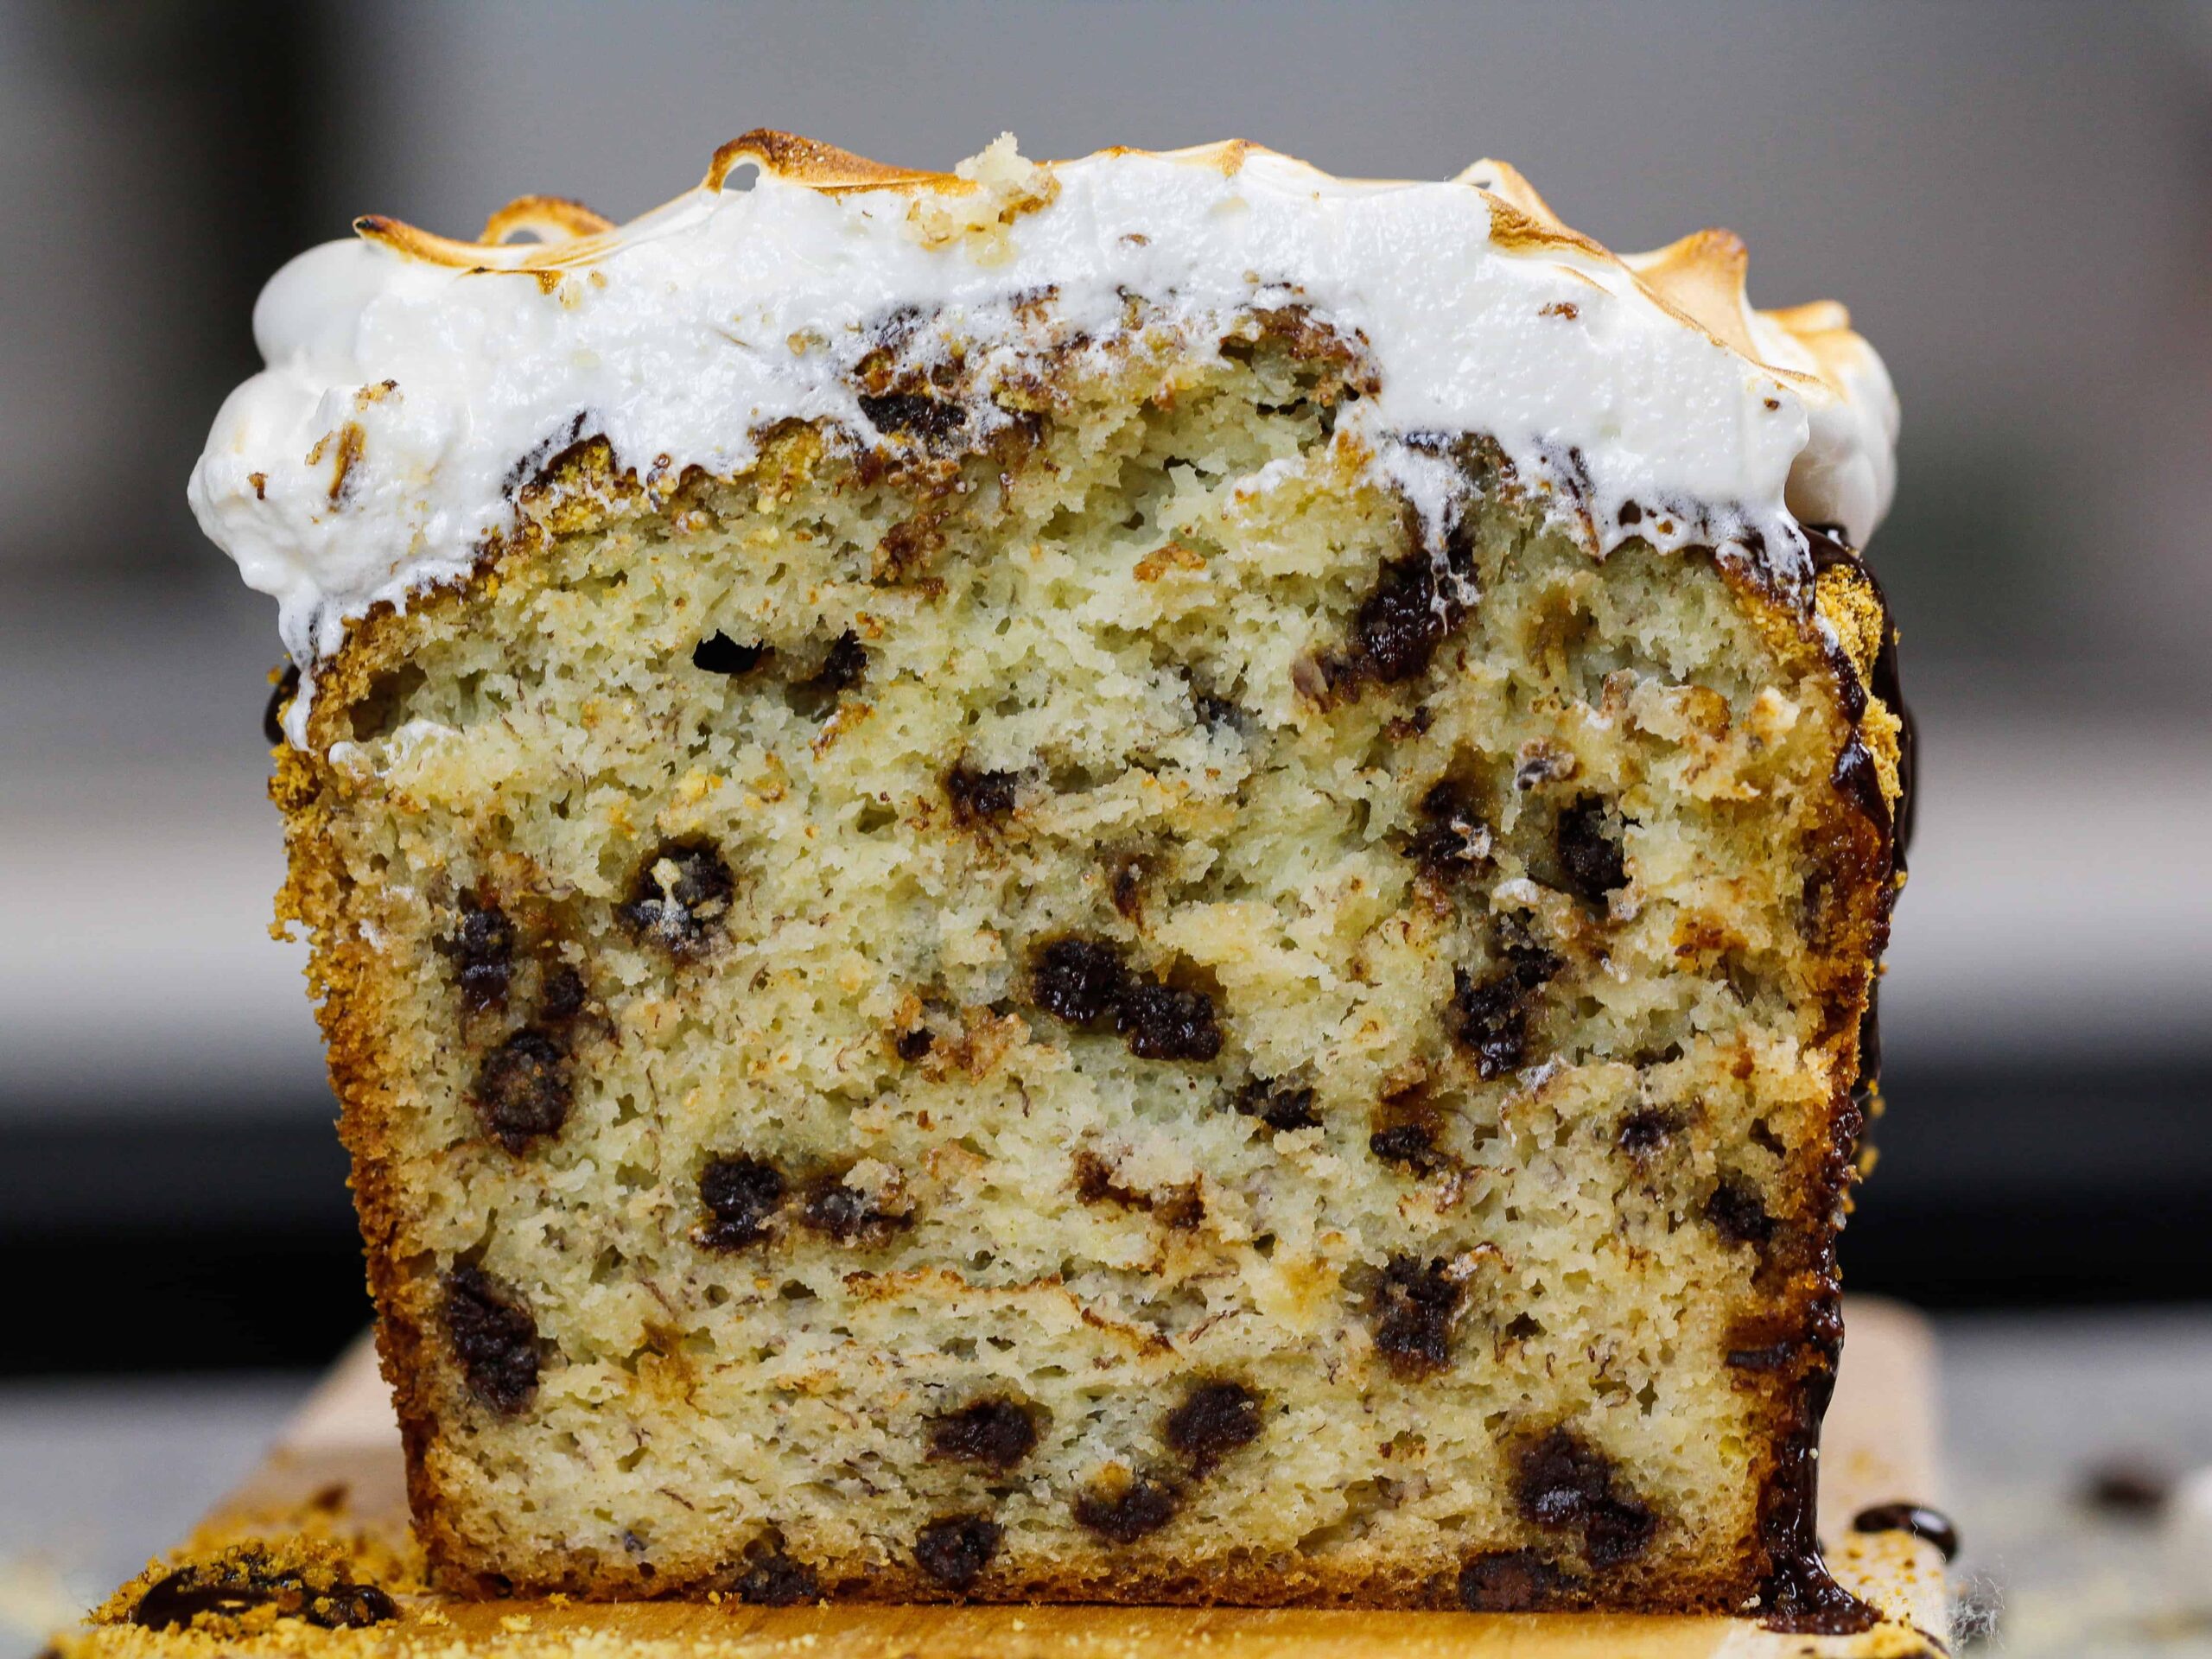 image of smores banana bread loaf cut open to show chocolate chips and toasted marshmallow topping